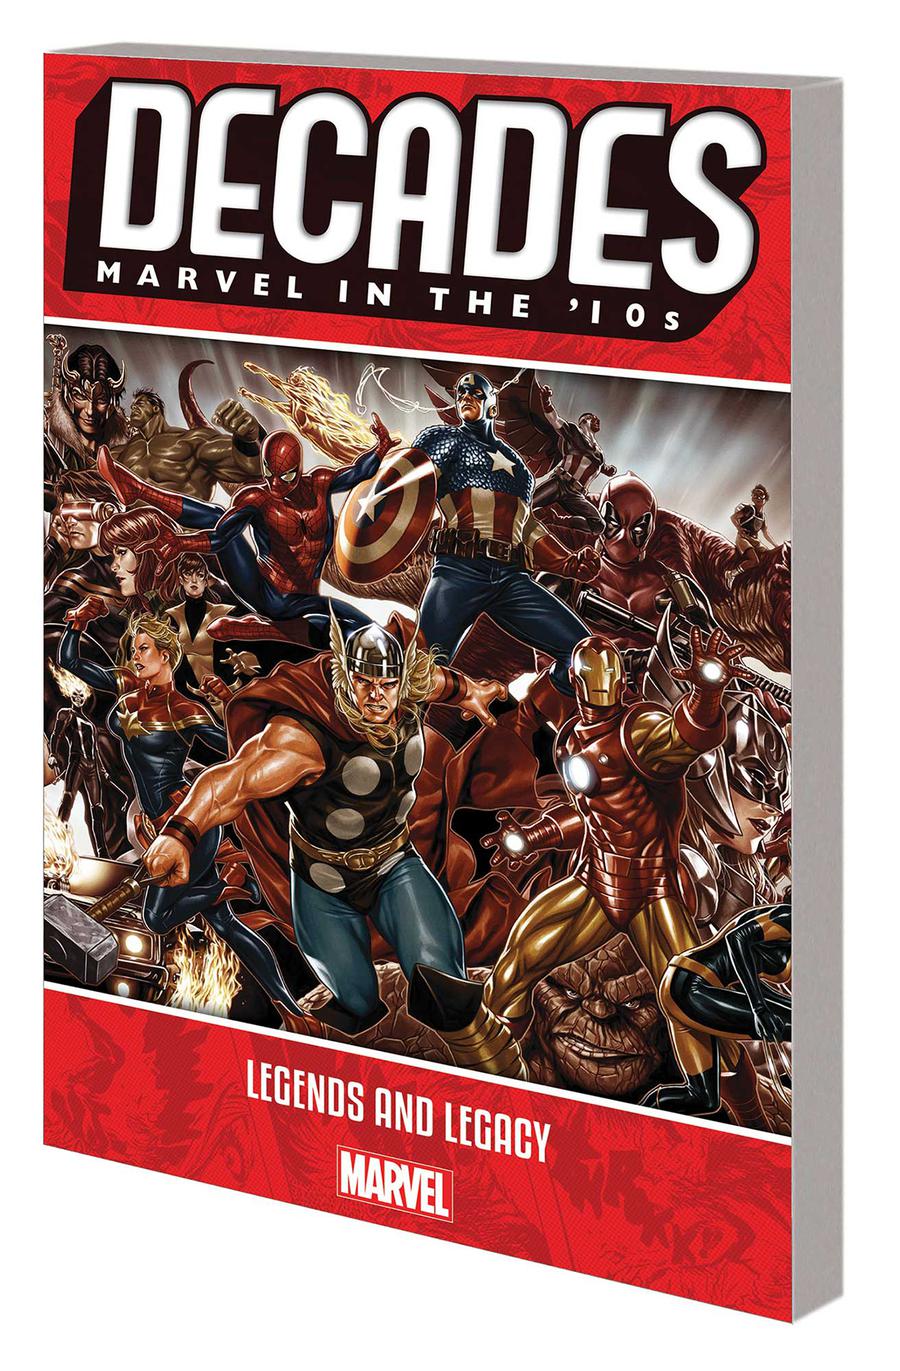 Decades Marvel In The 10s Legends And Legacy TP